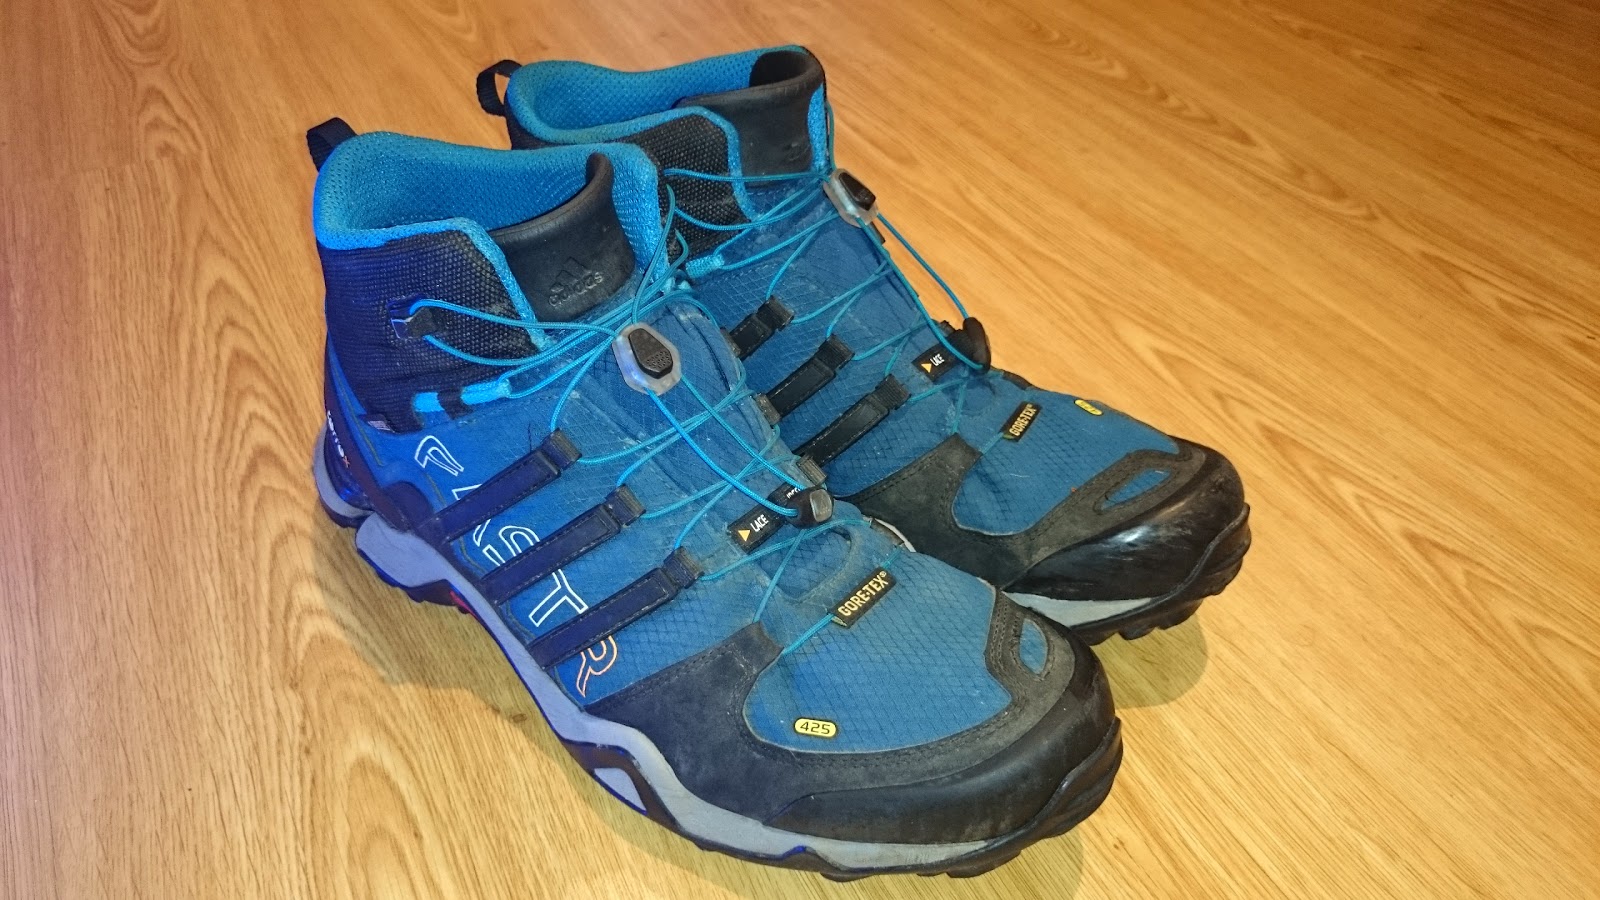 Fell: Adidas Terrex Fast R Mid Gore-Tex Boot Review